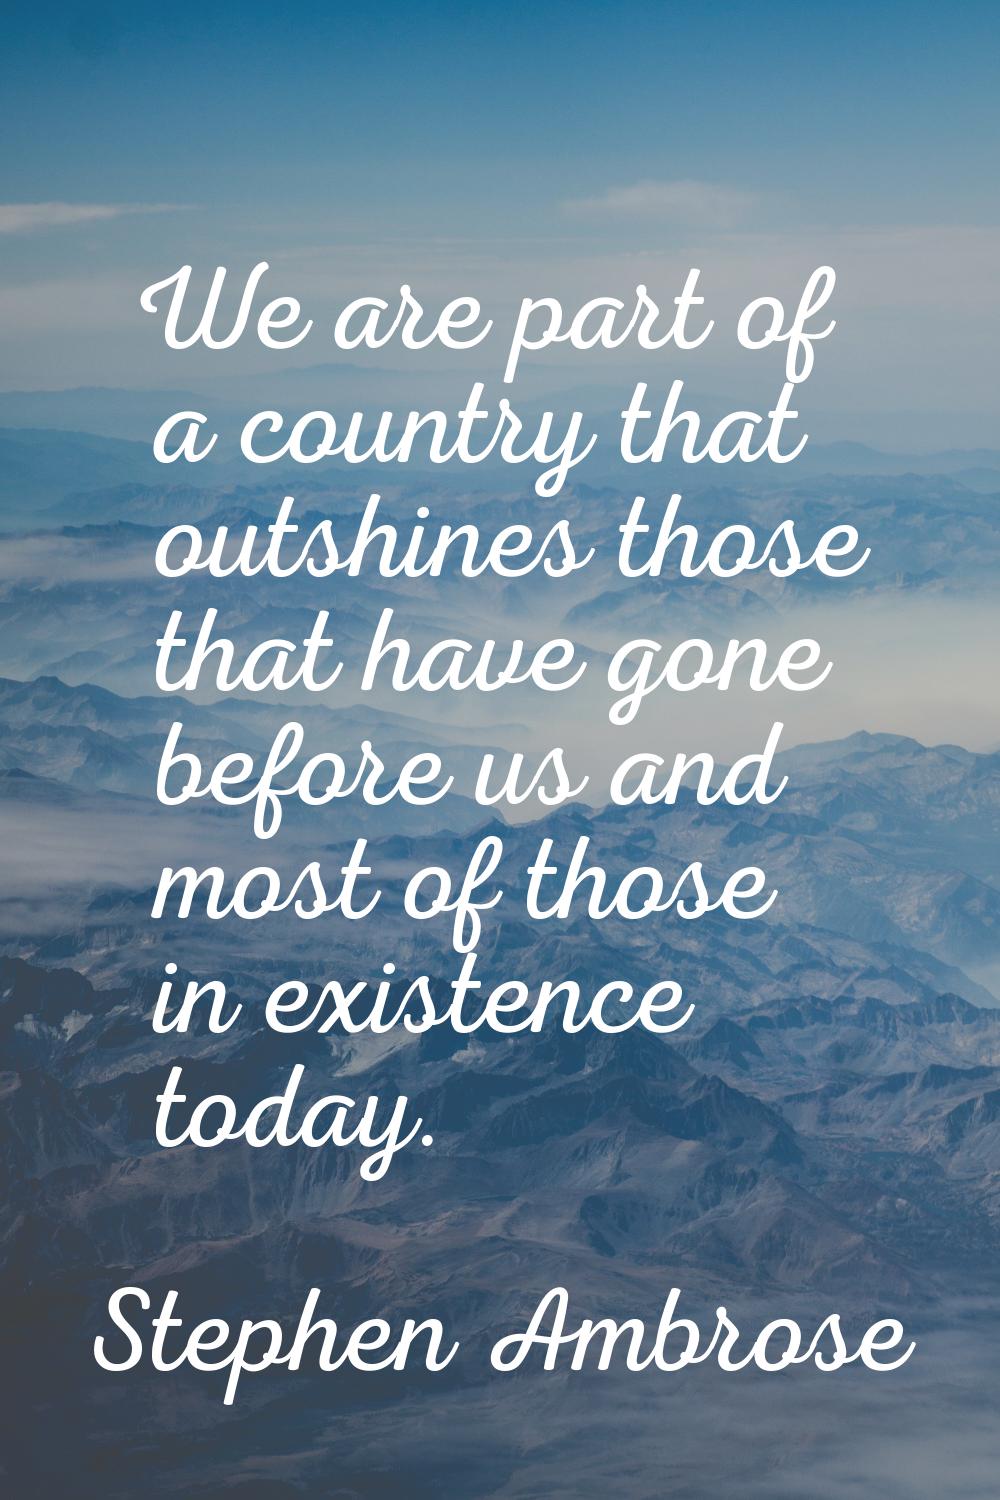 We are part of a country that outshines those that have gone before us and most of those in existen